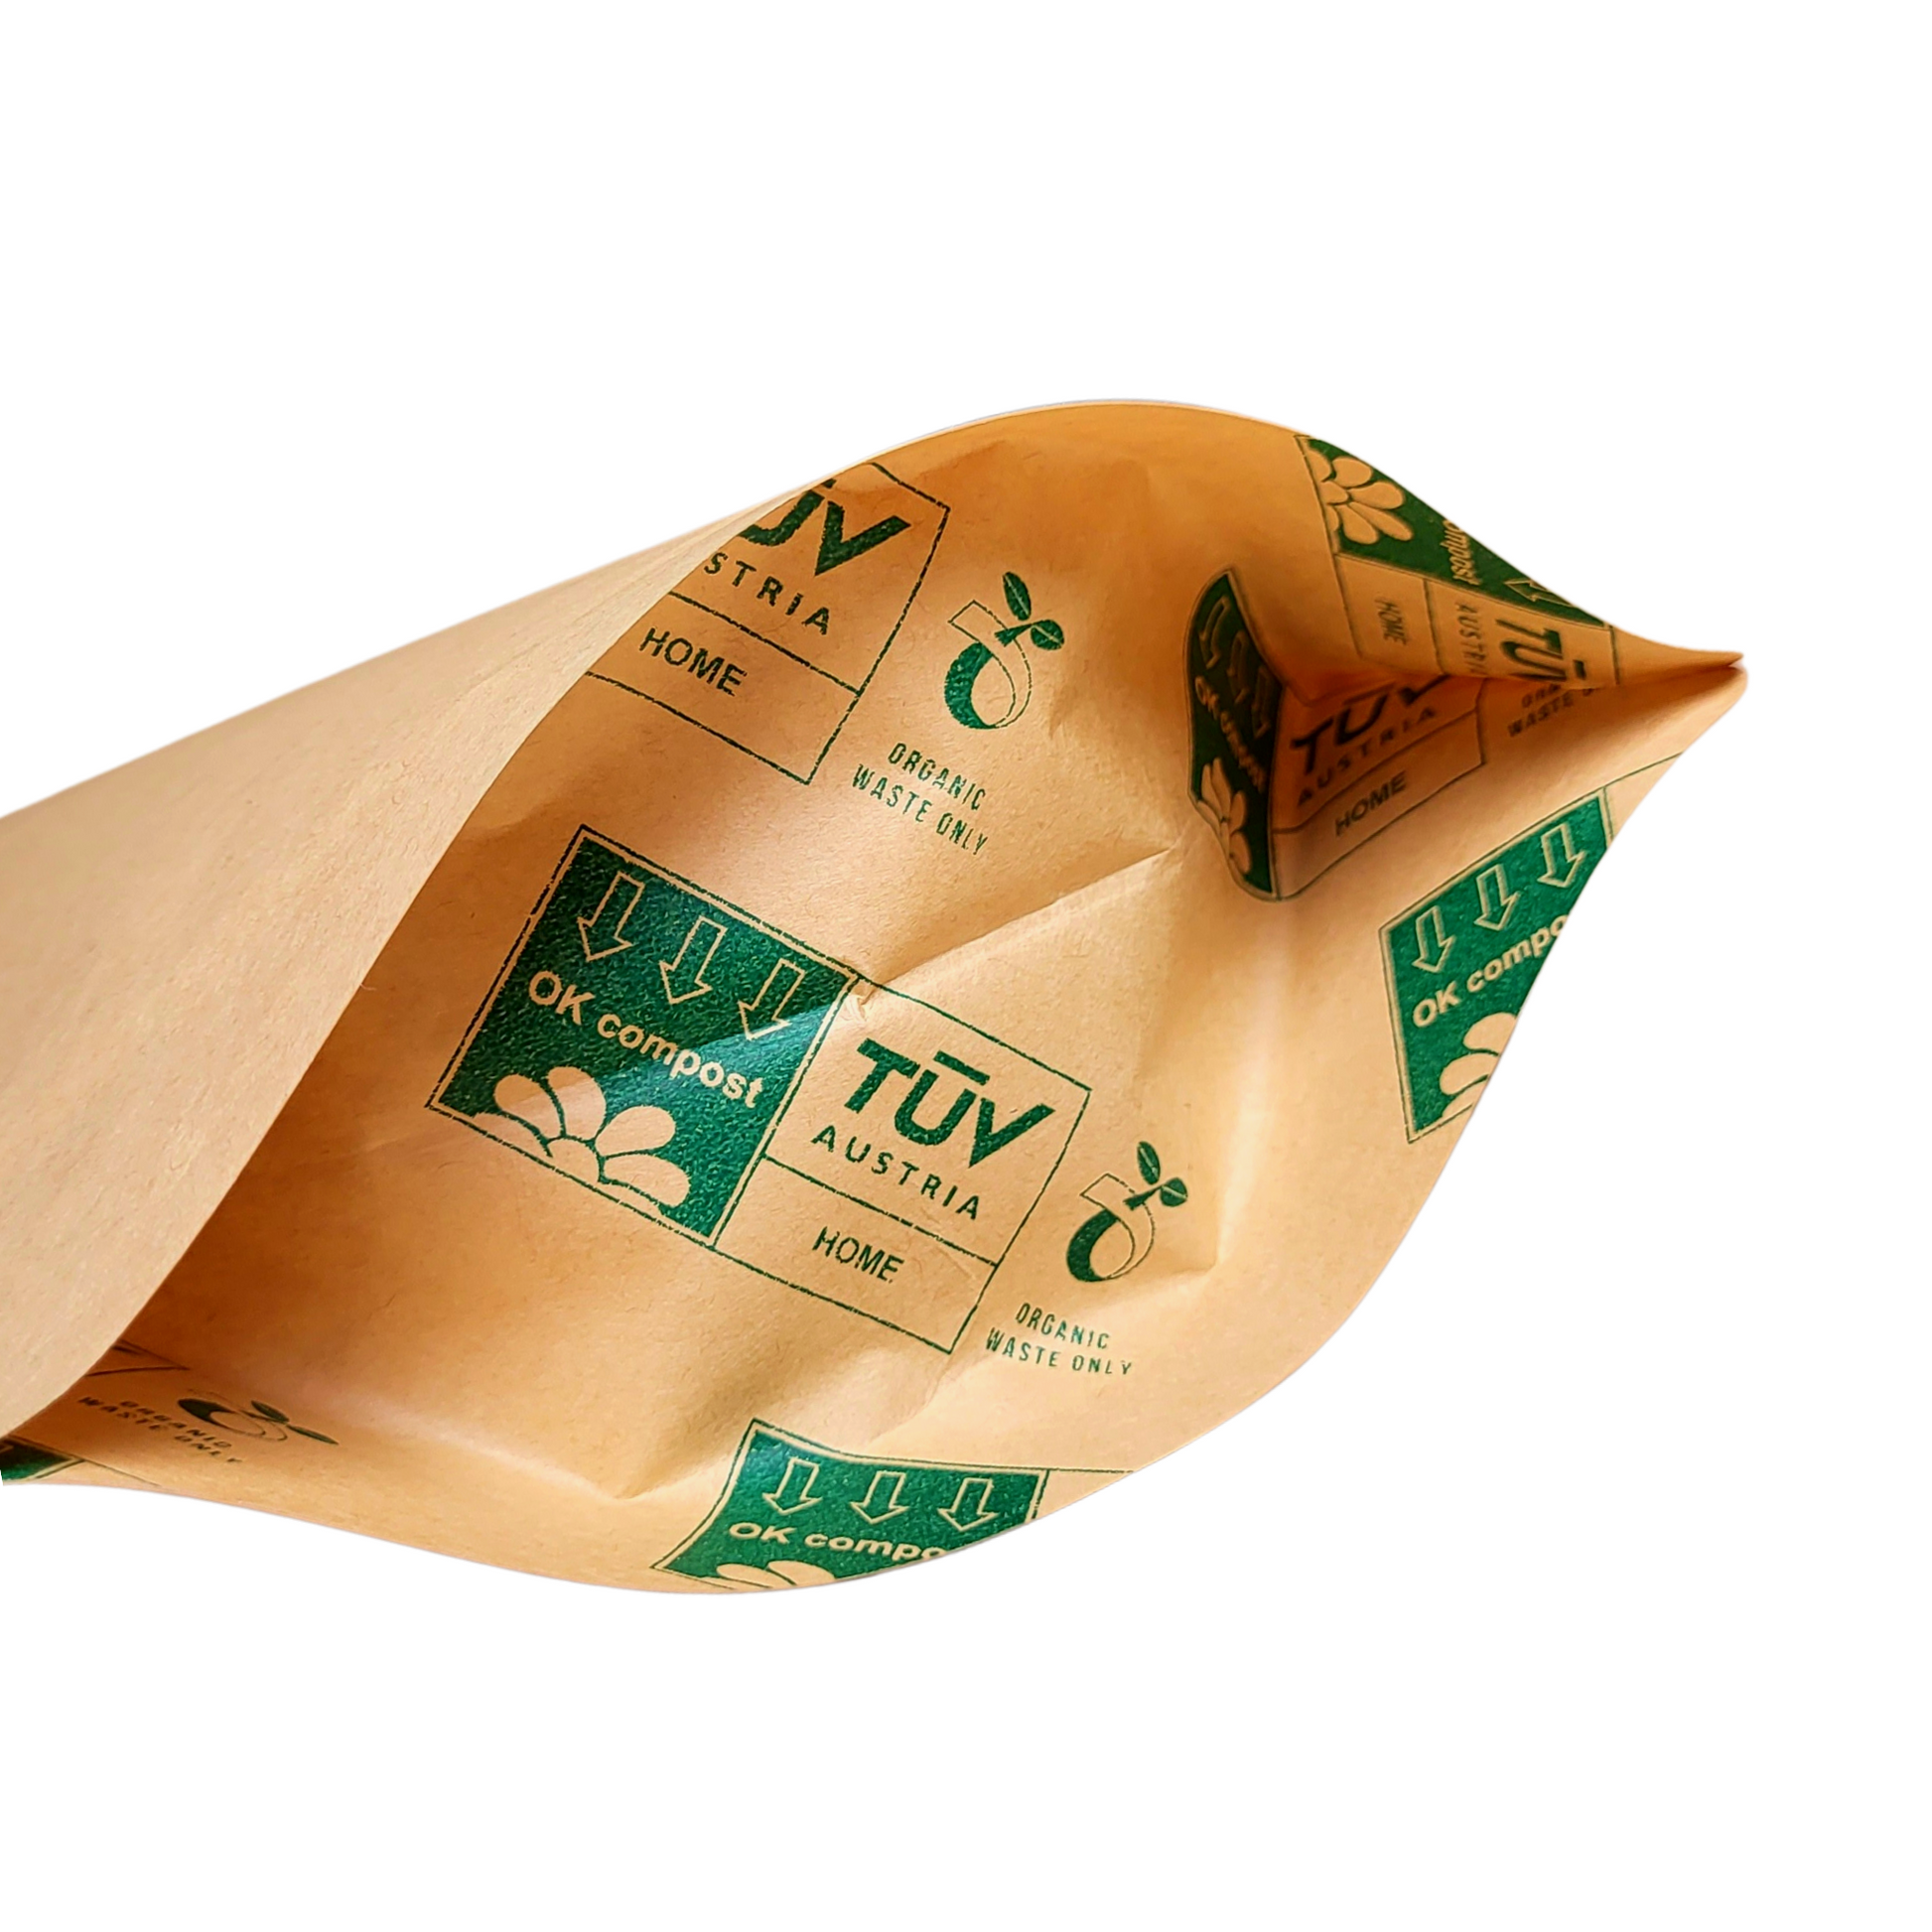 Compostable doypack made of kraft paper and bioplastic. Packaging designed for home composting.